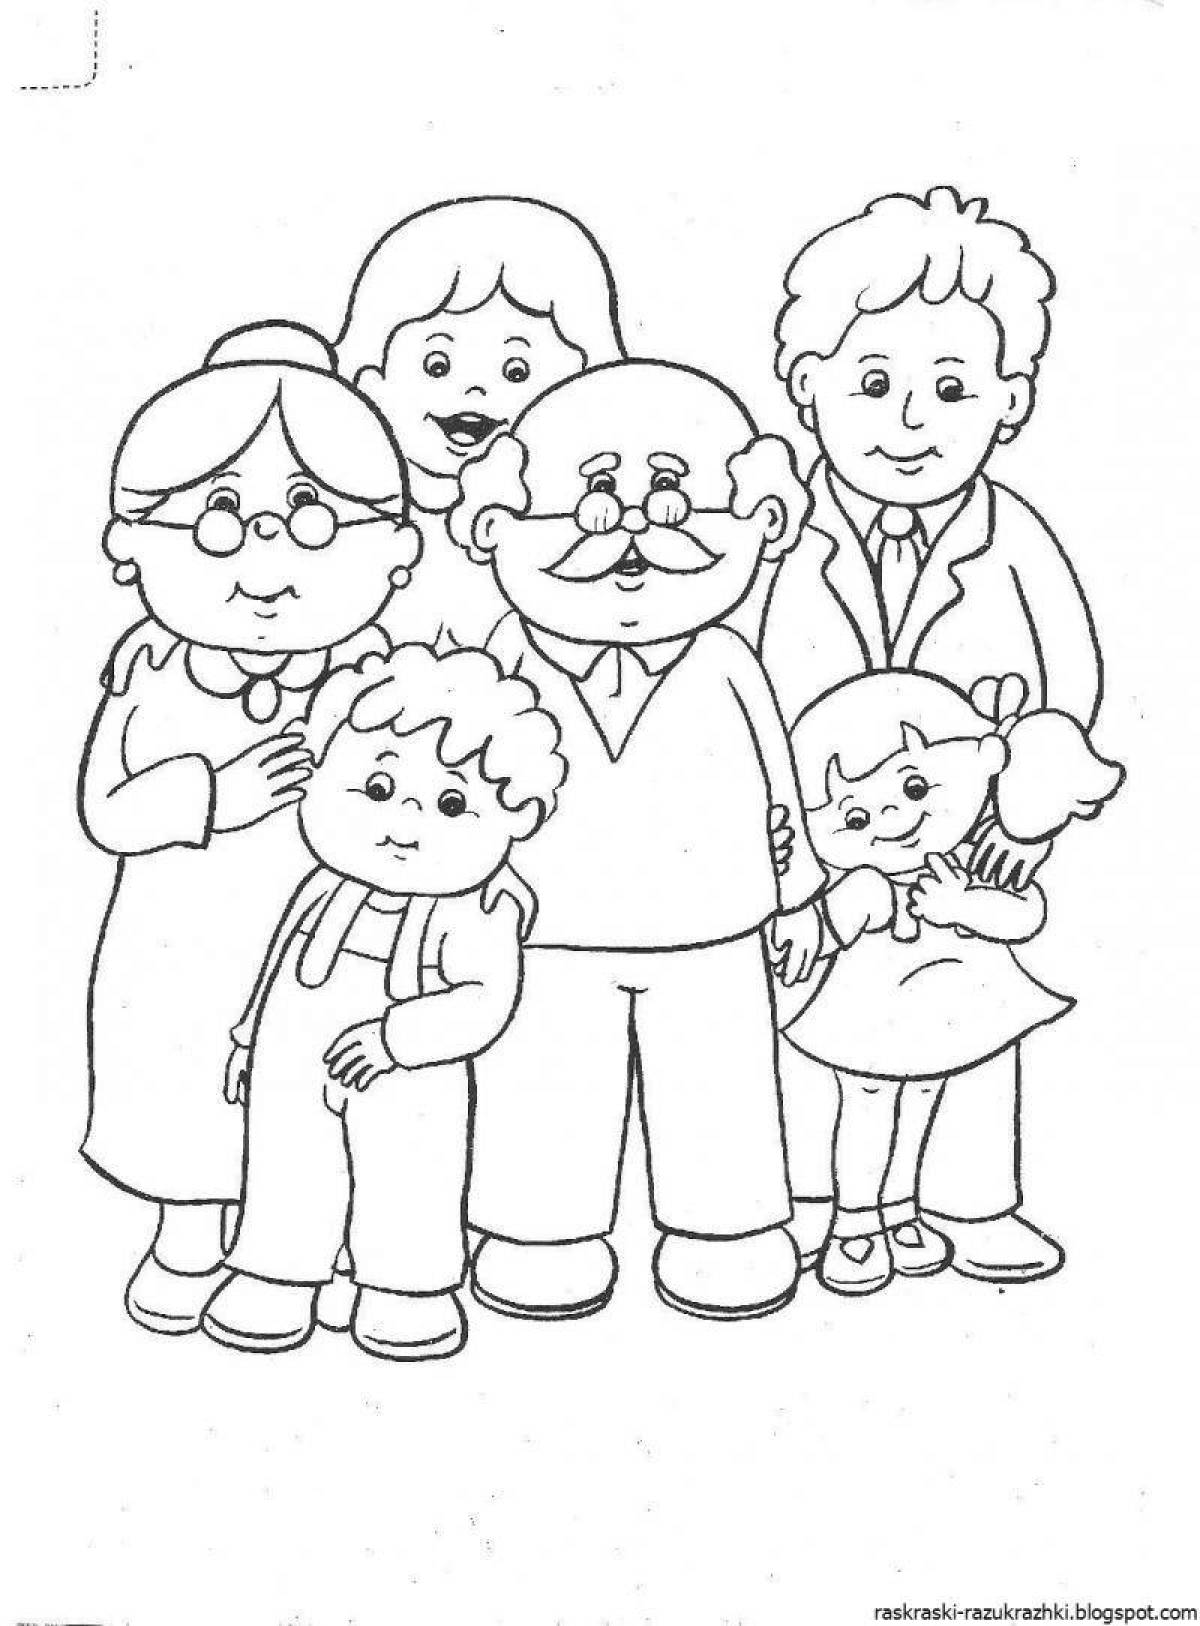 Colored family coloring book for children 5-6 years old